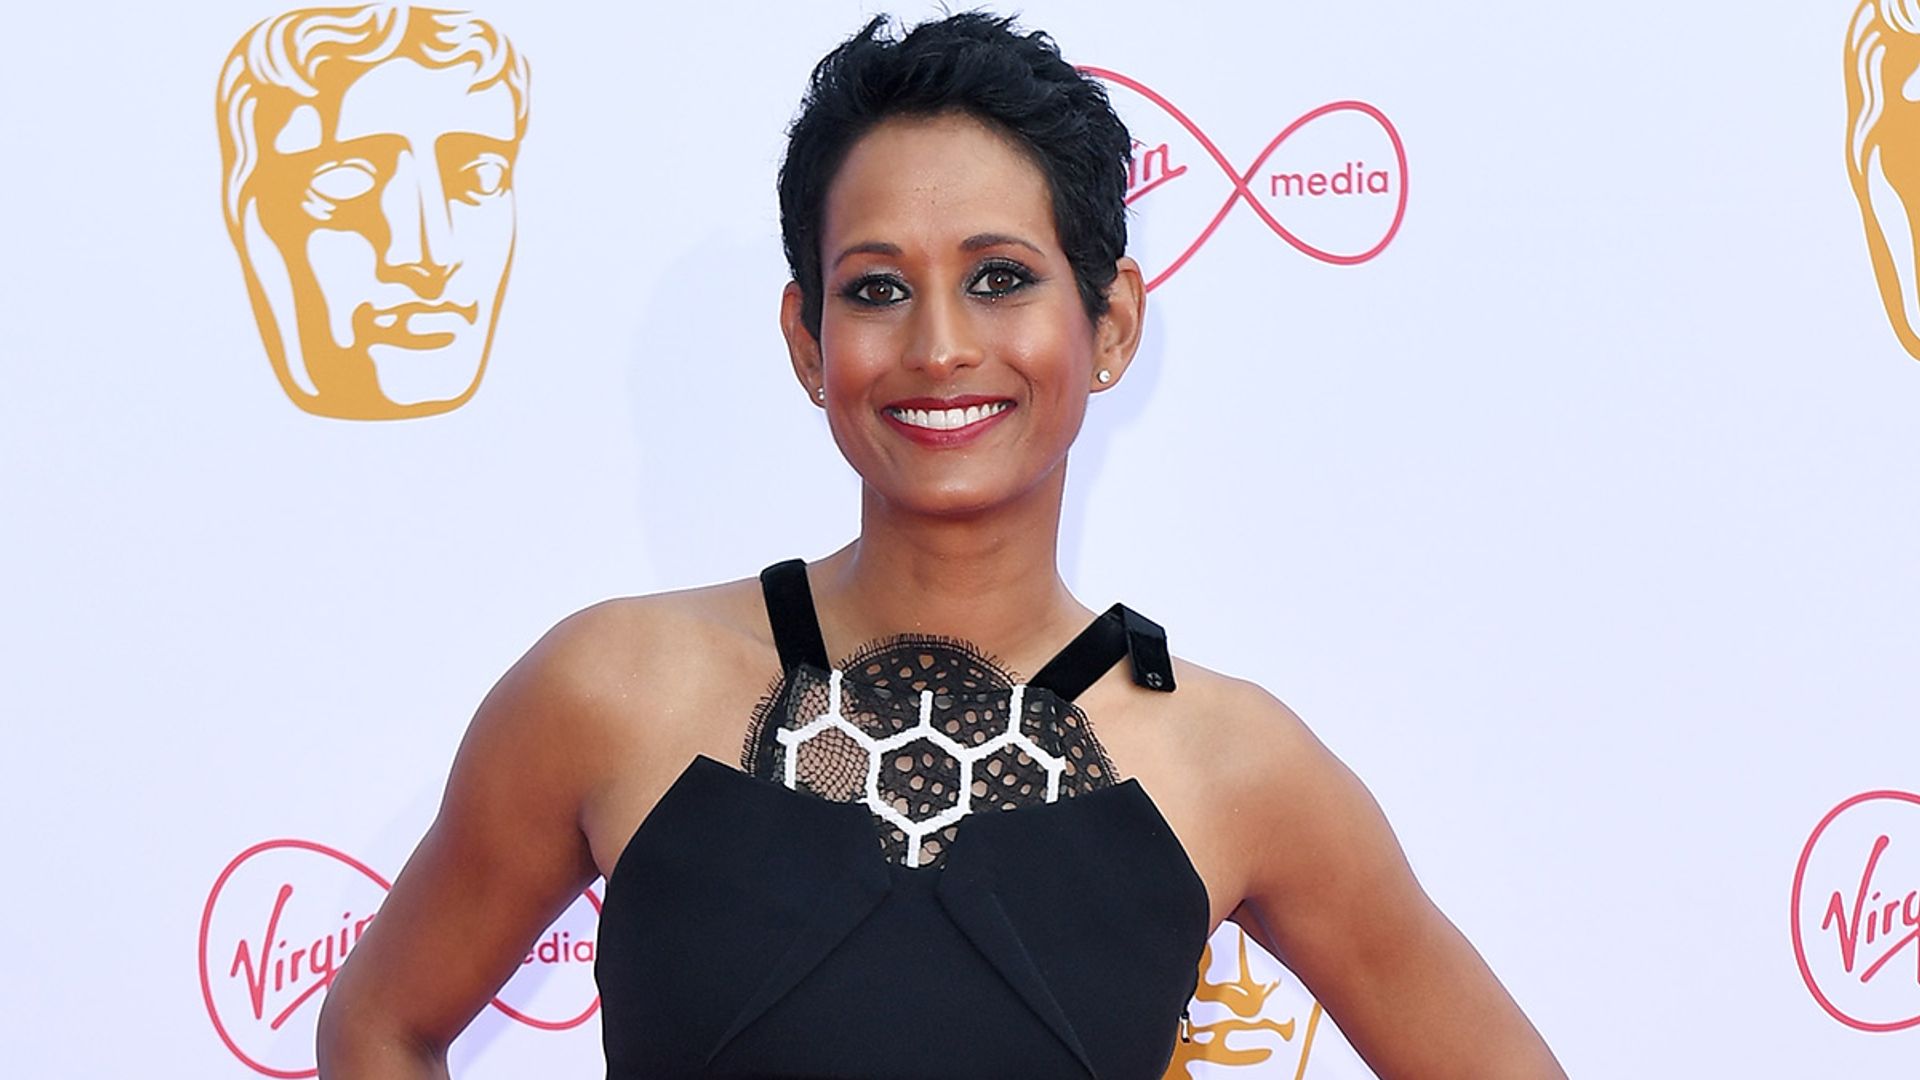 Naga Munchetty shares candid selfie after revealing morning routine